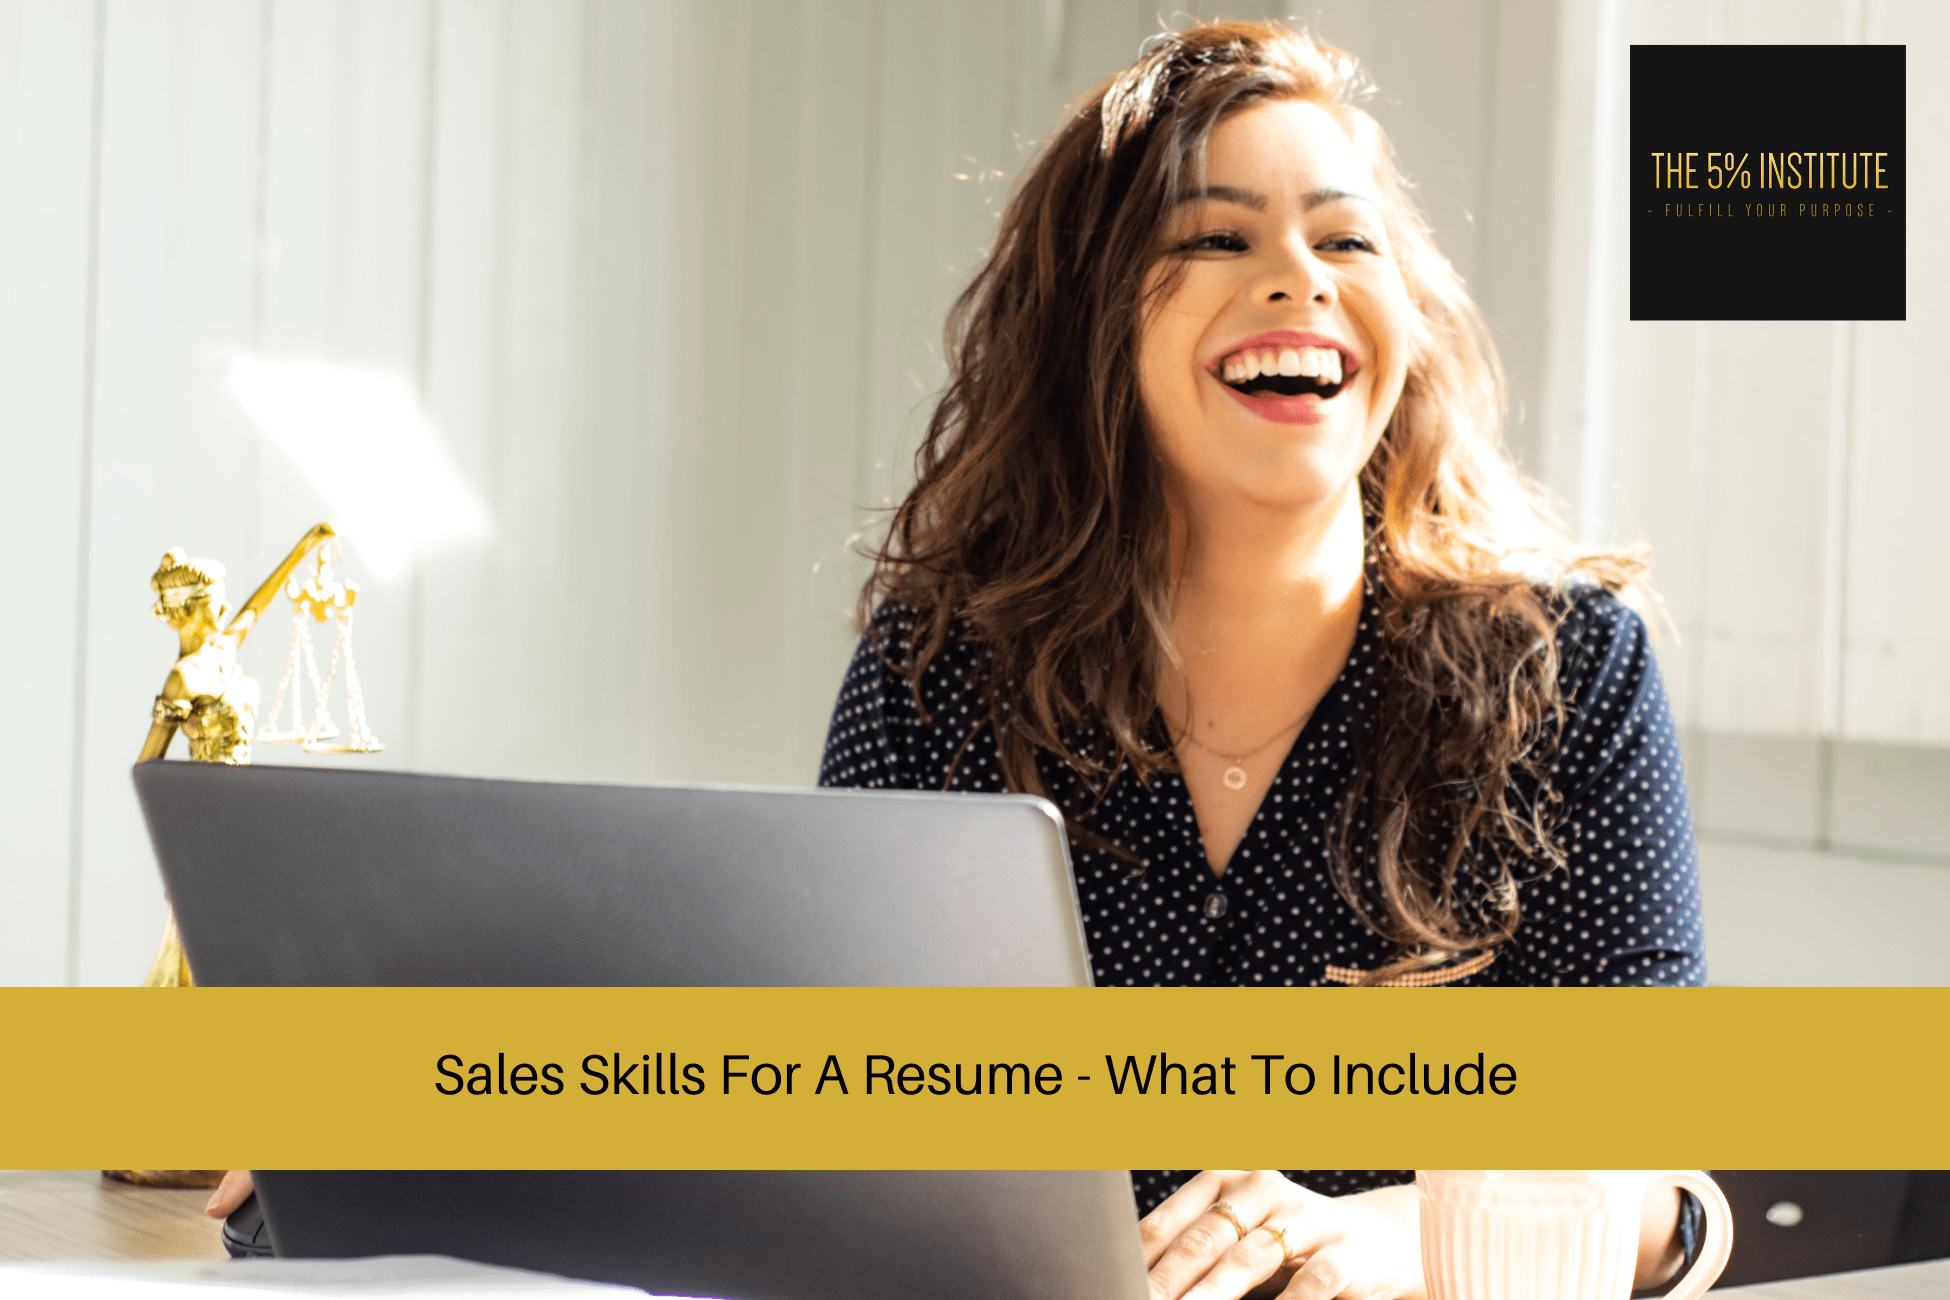 Sales Skills For A Resume - What To Include